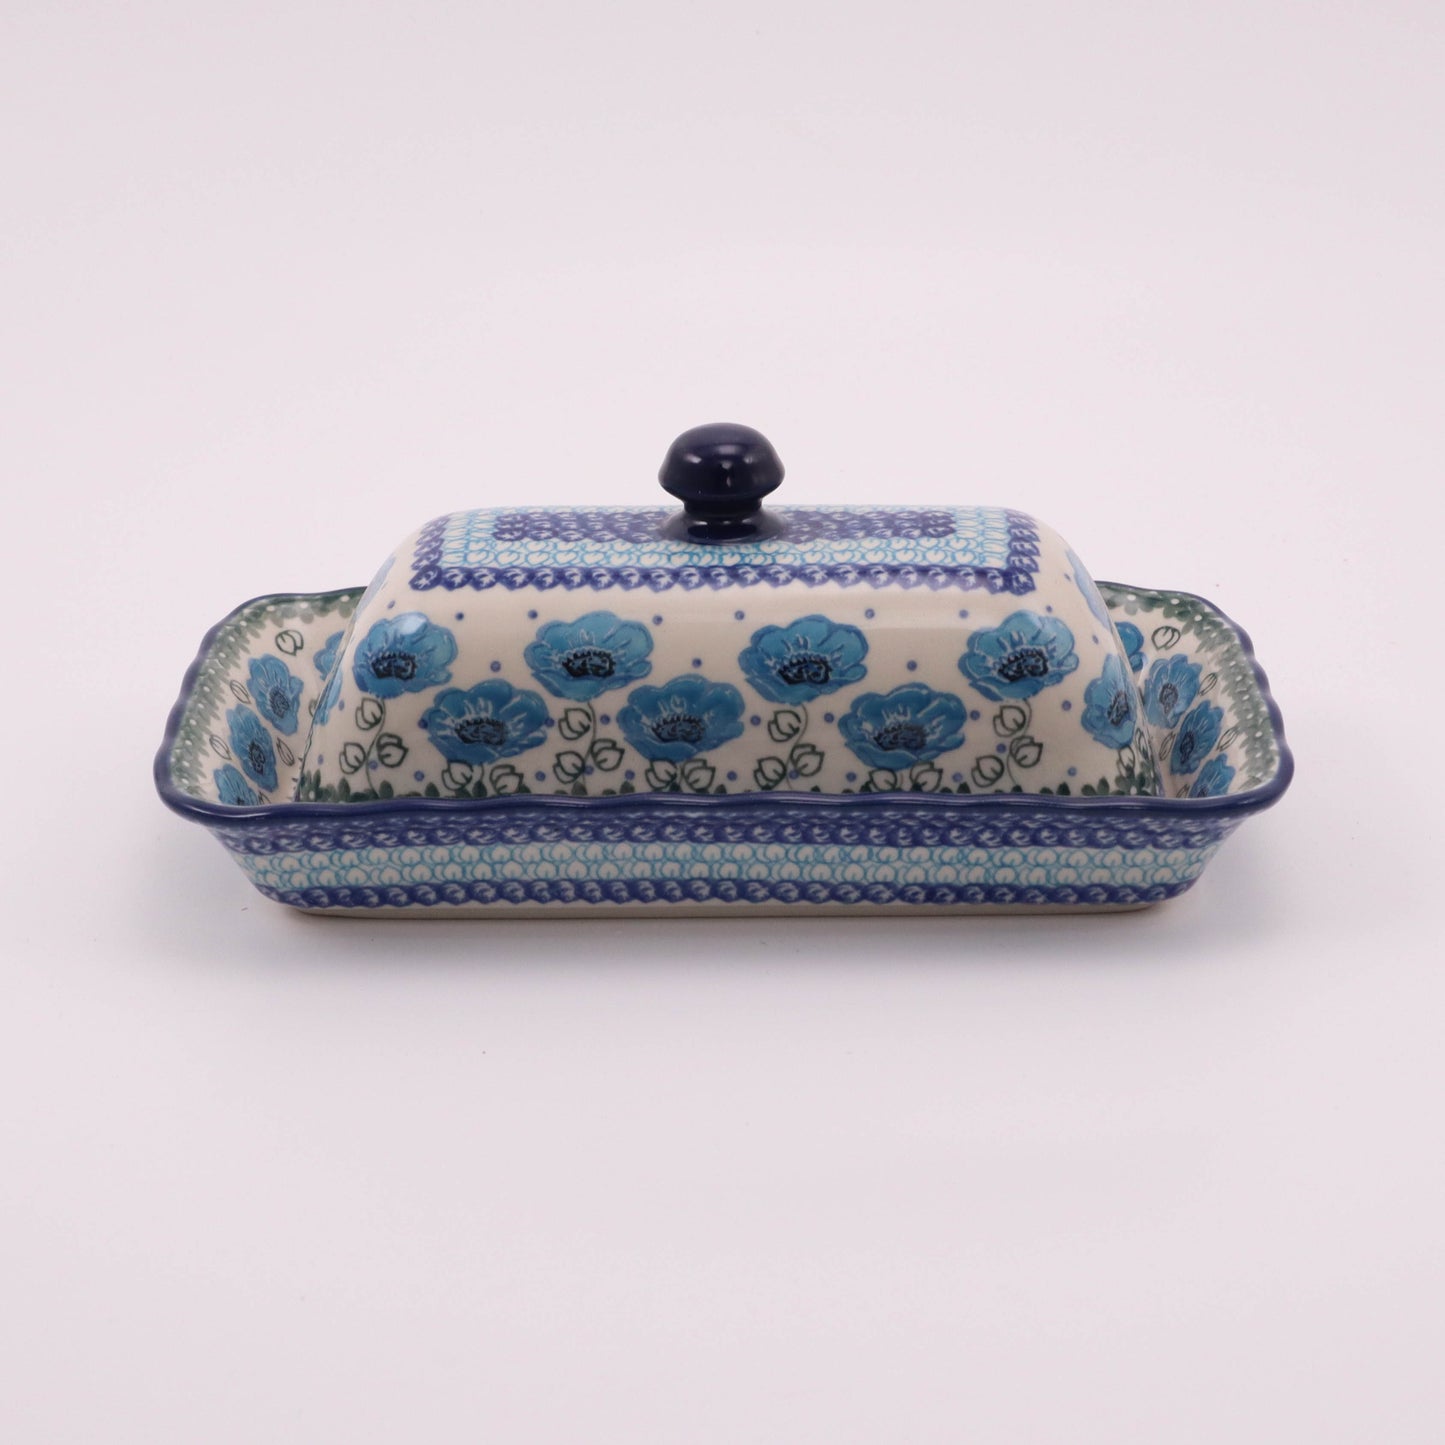 9"x5"x3" Covered Butter Dish. Pattern: 170